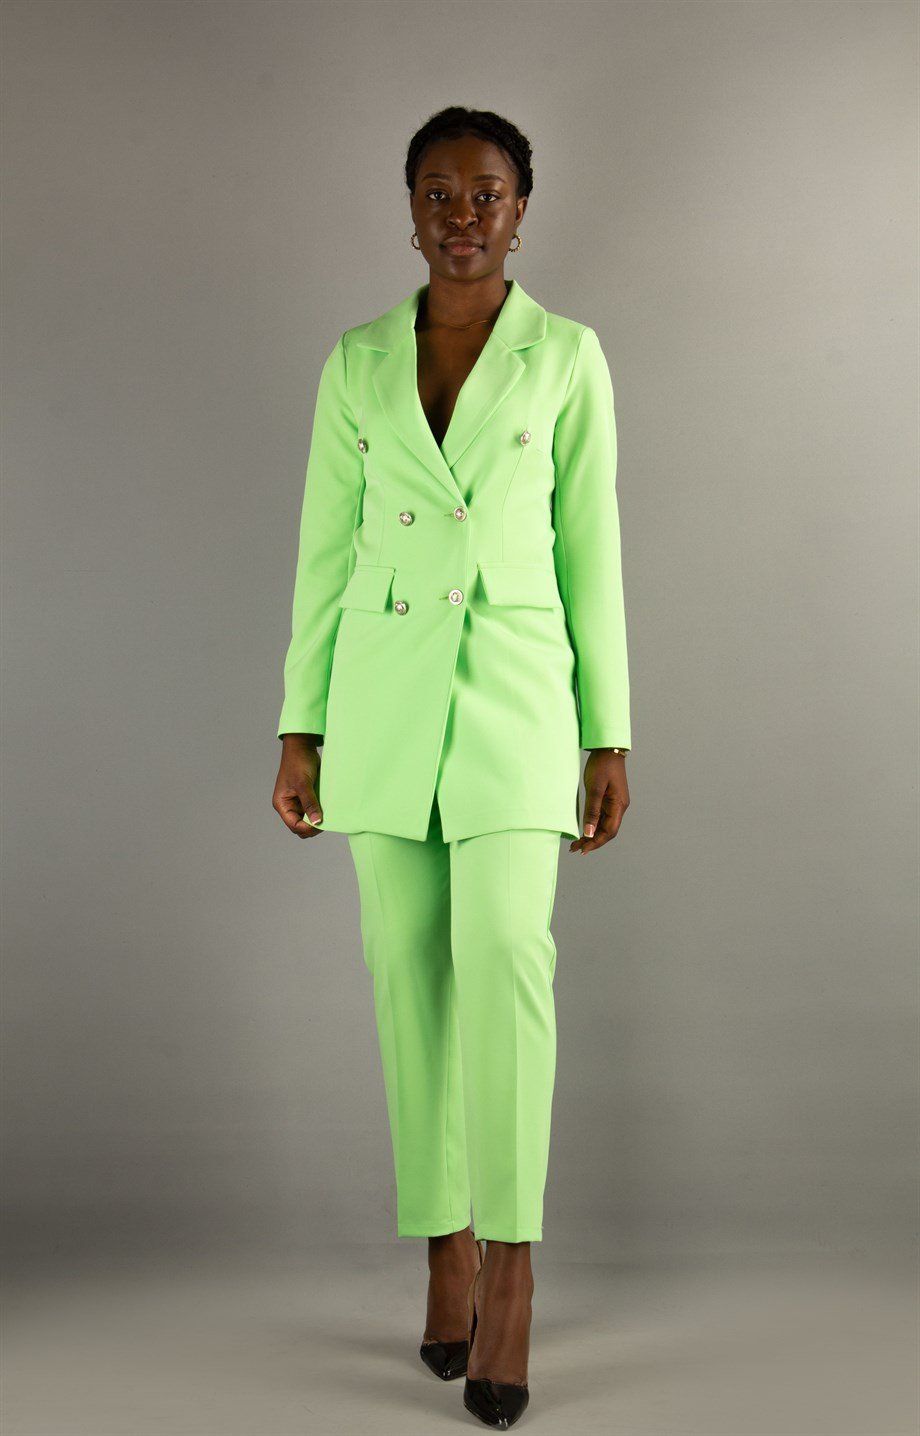 Womens Suit  Suits for women, Green outfits for women, Green suit women